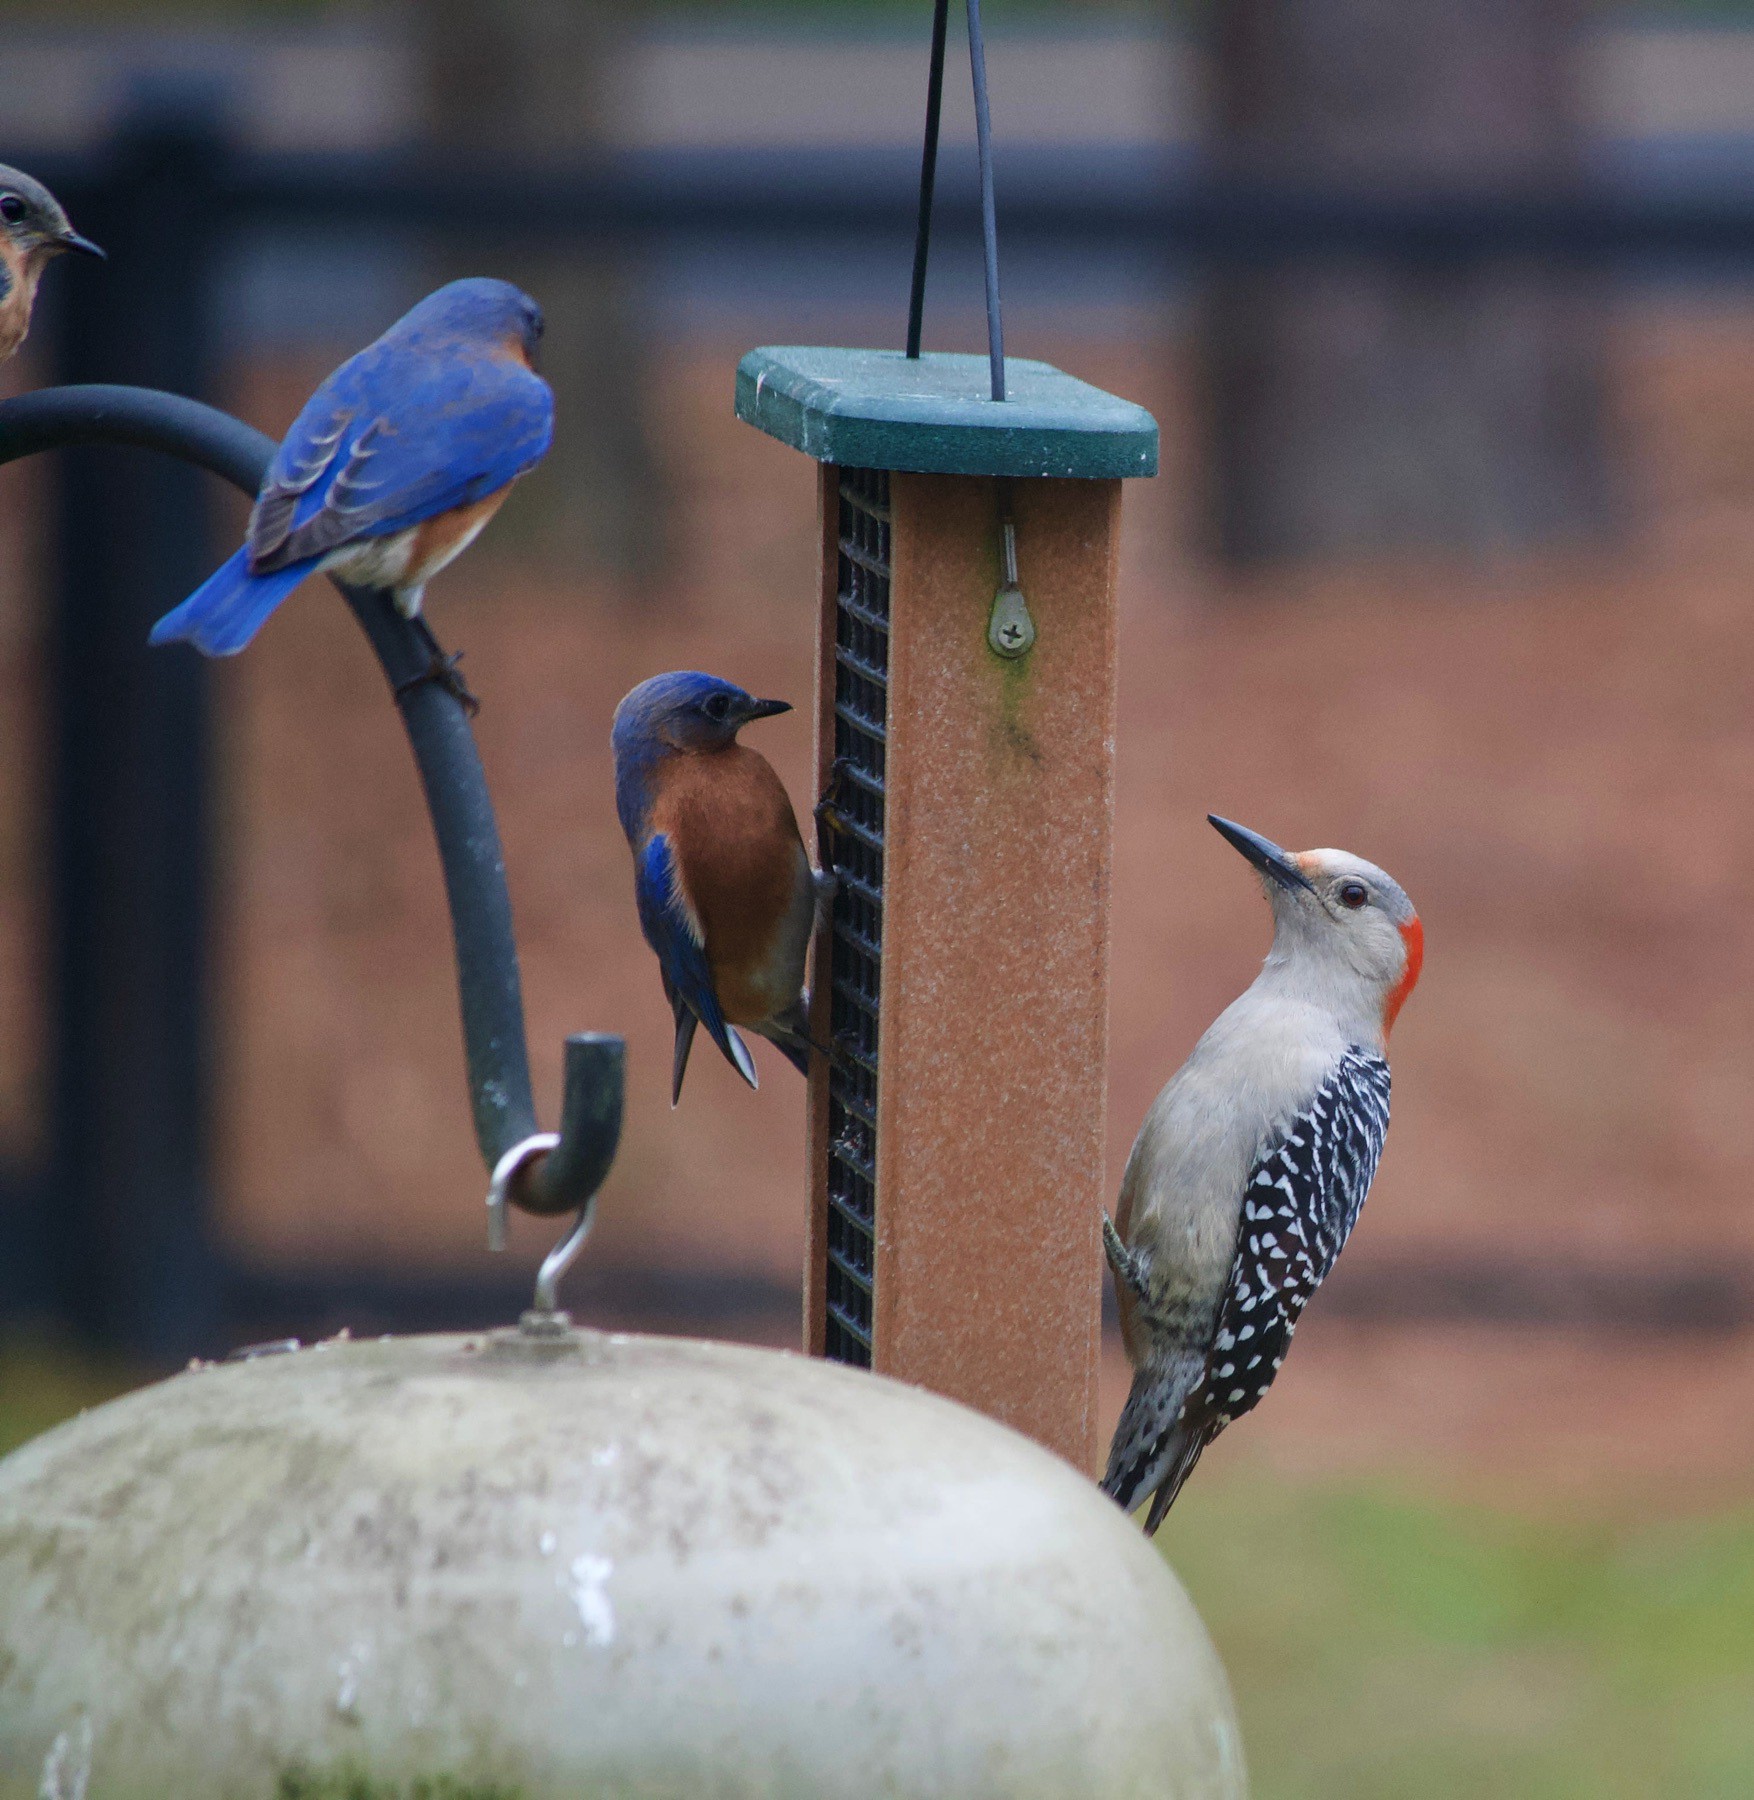 Closeup of a bird feeder. On the feeder are Blue birds and a Red-Bellied woodpecker.